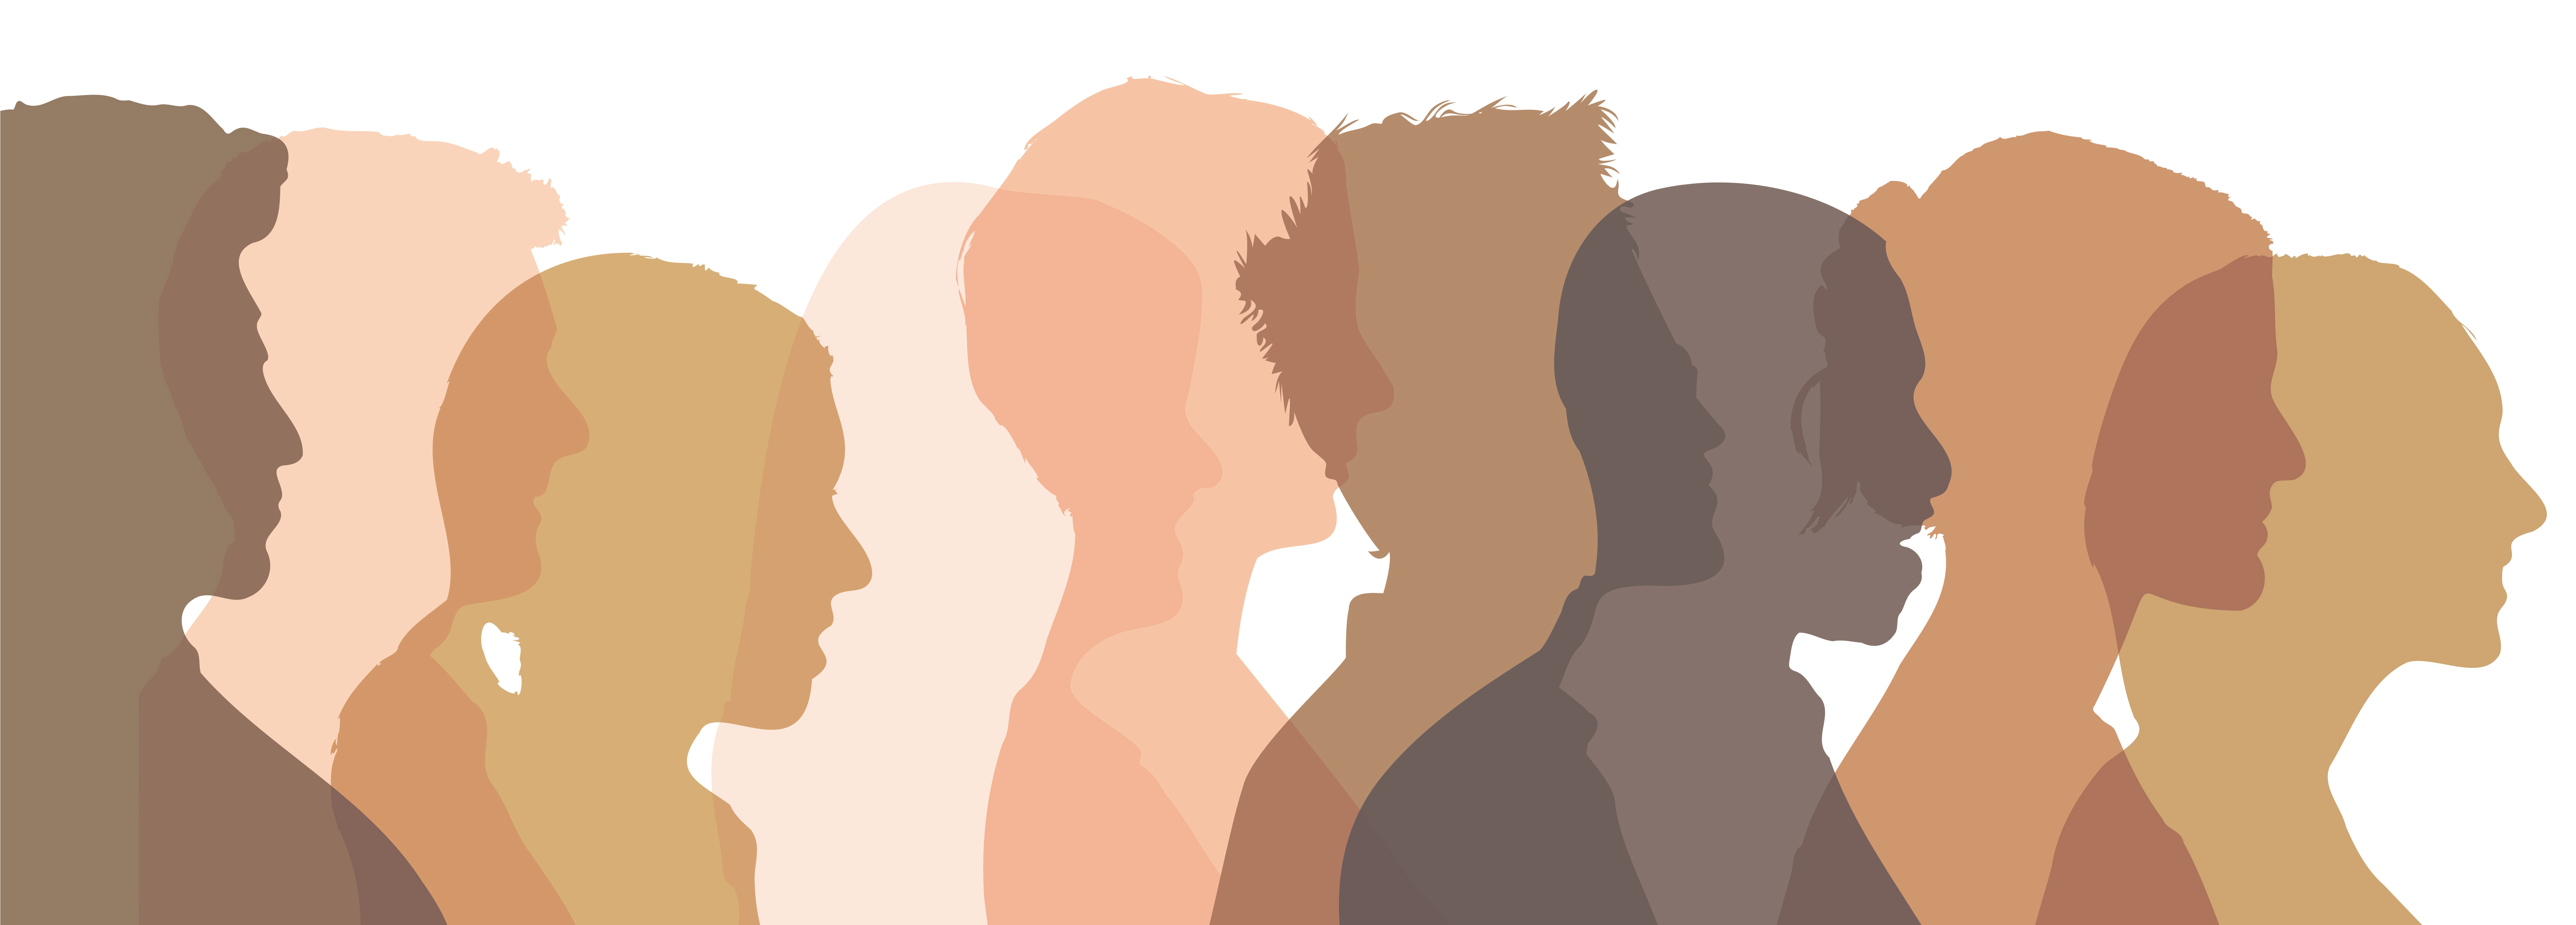 Person Backgrounds